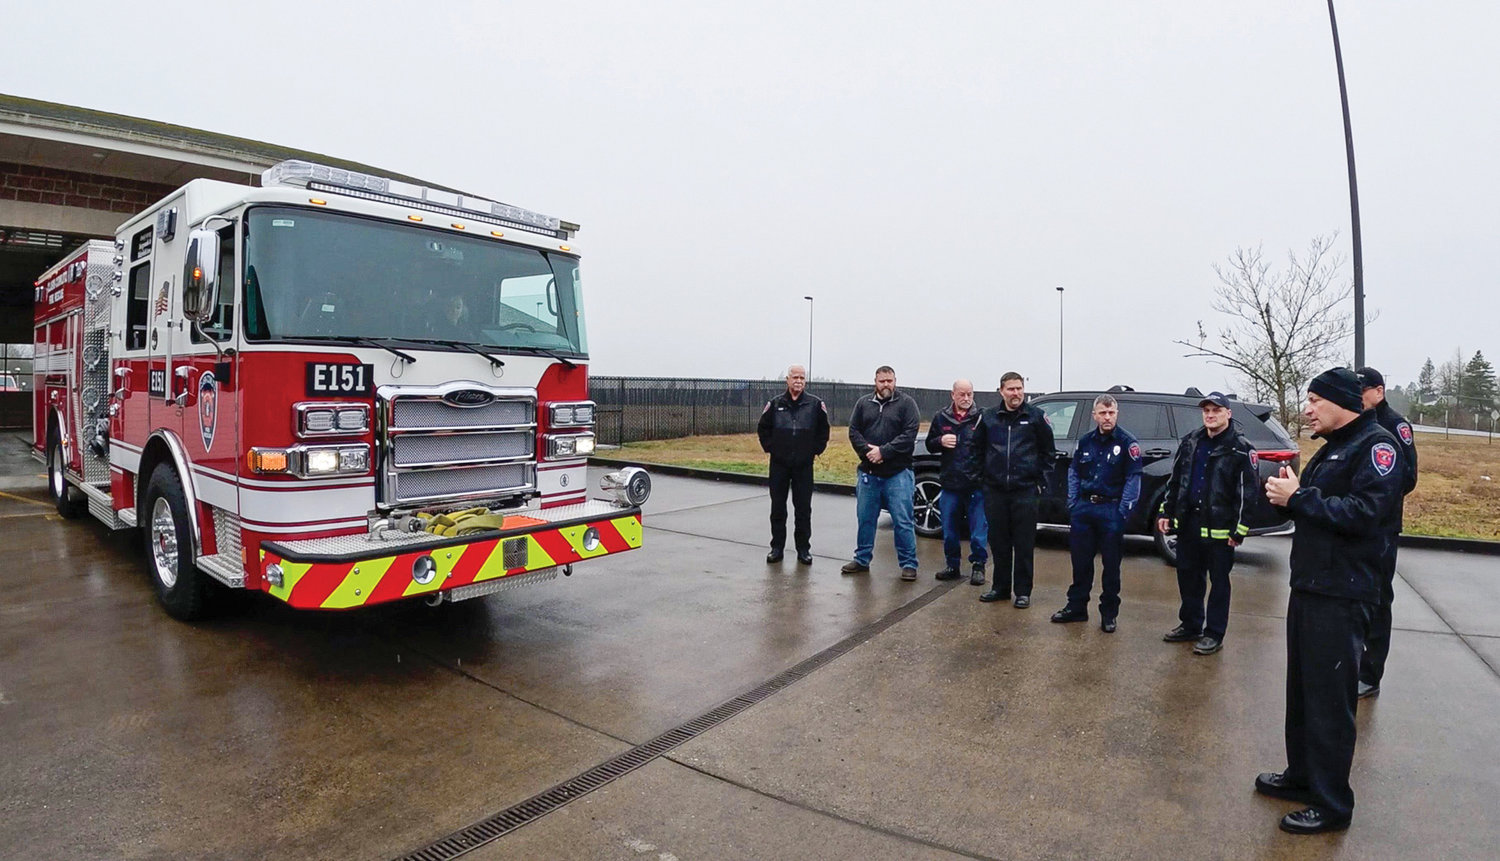 Clark-Cowlitz Fire Rescue Chief John Nohr, right, speaks to firefighters and fire commissioners prior to a “push-in” ceremony for a new fire engine at Station 151 on March 8.